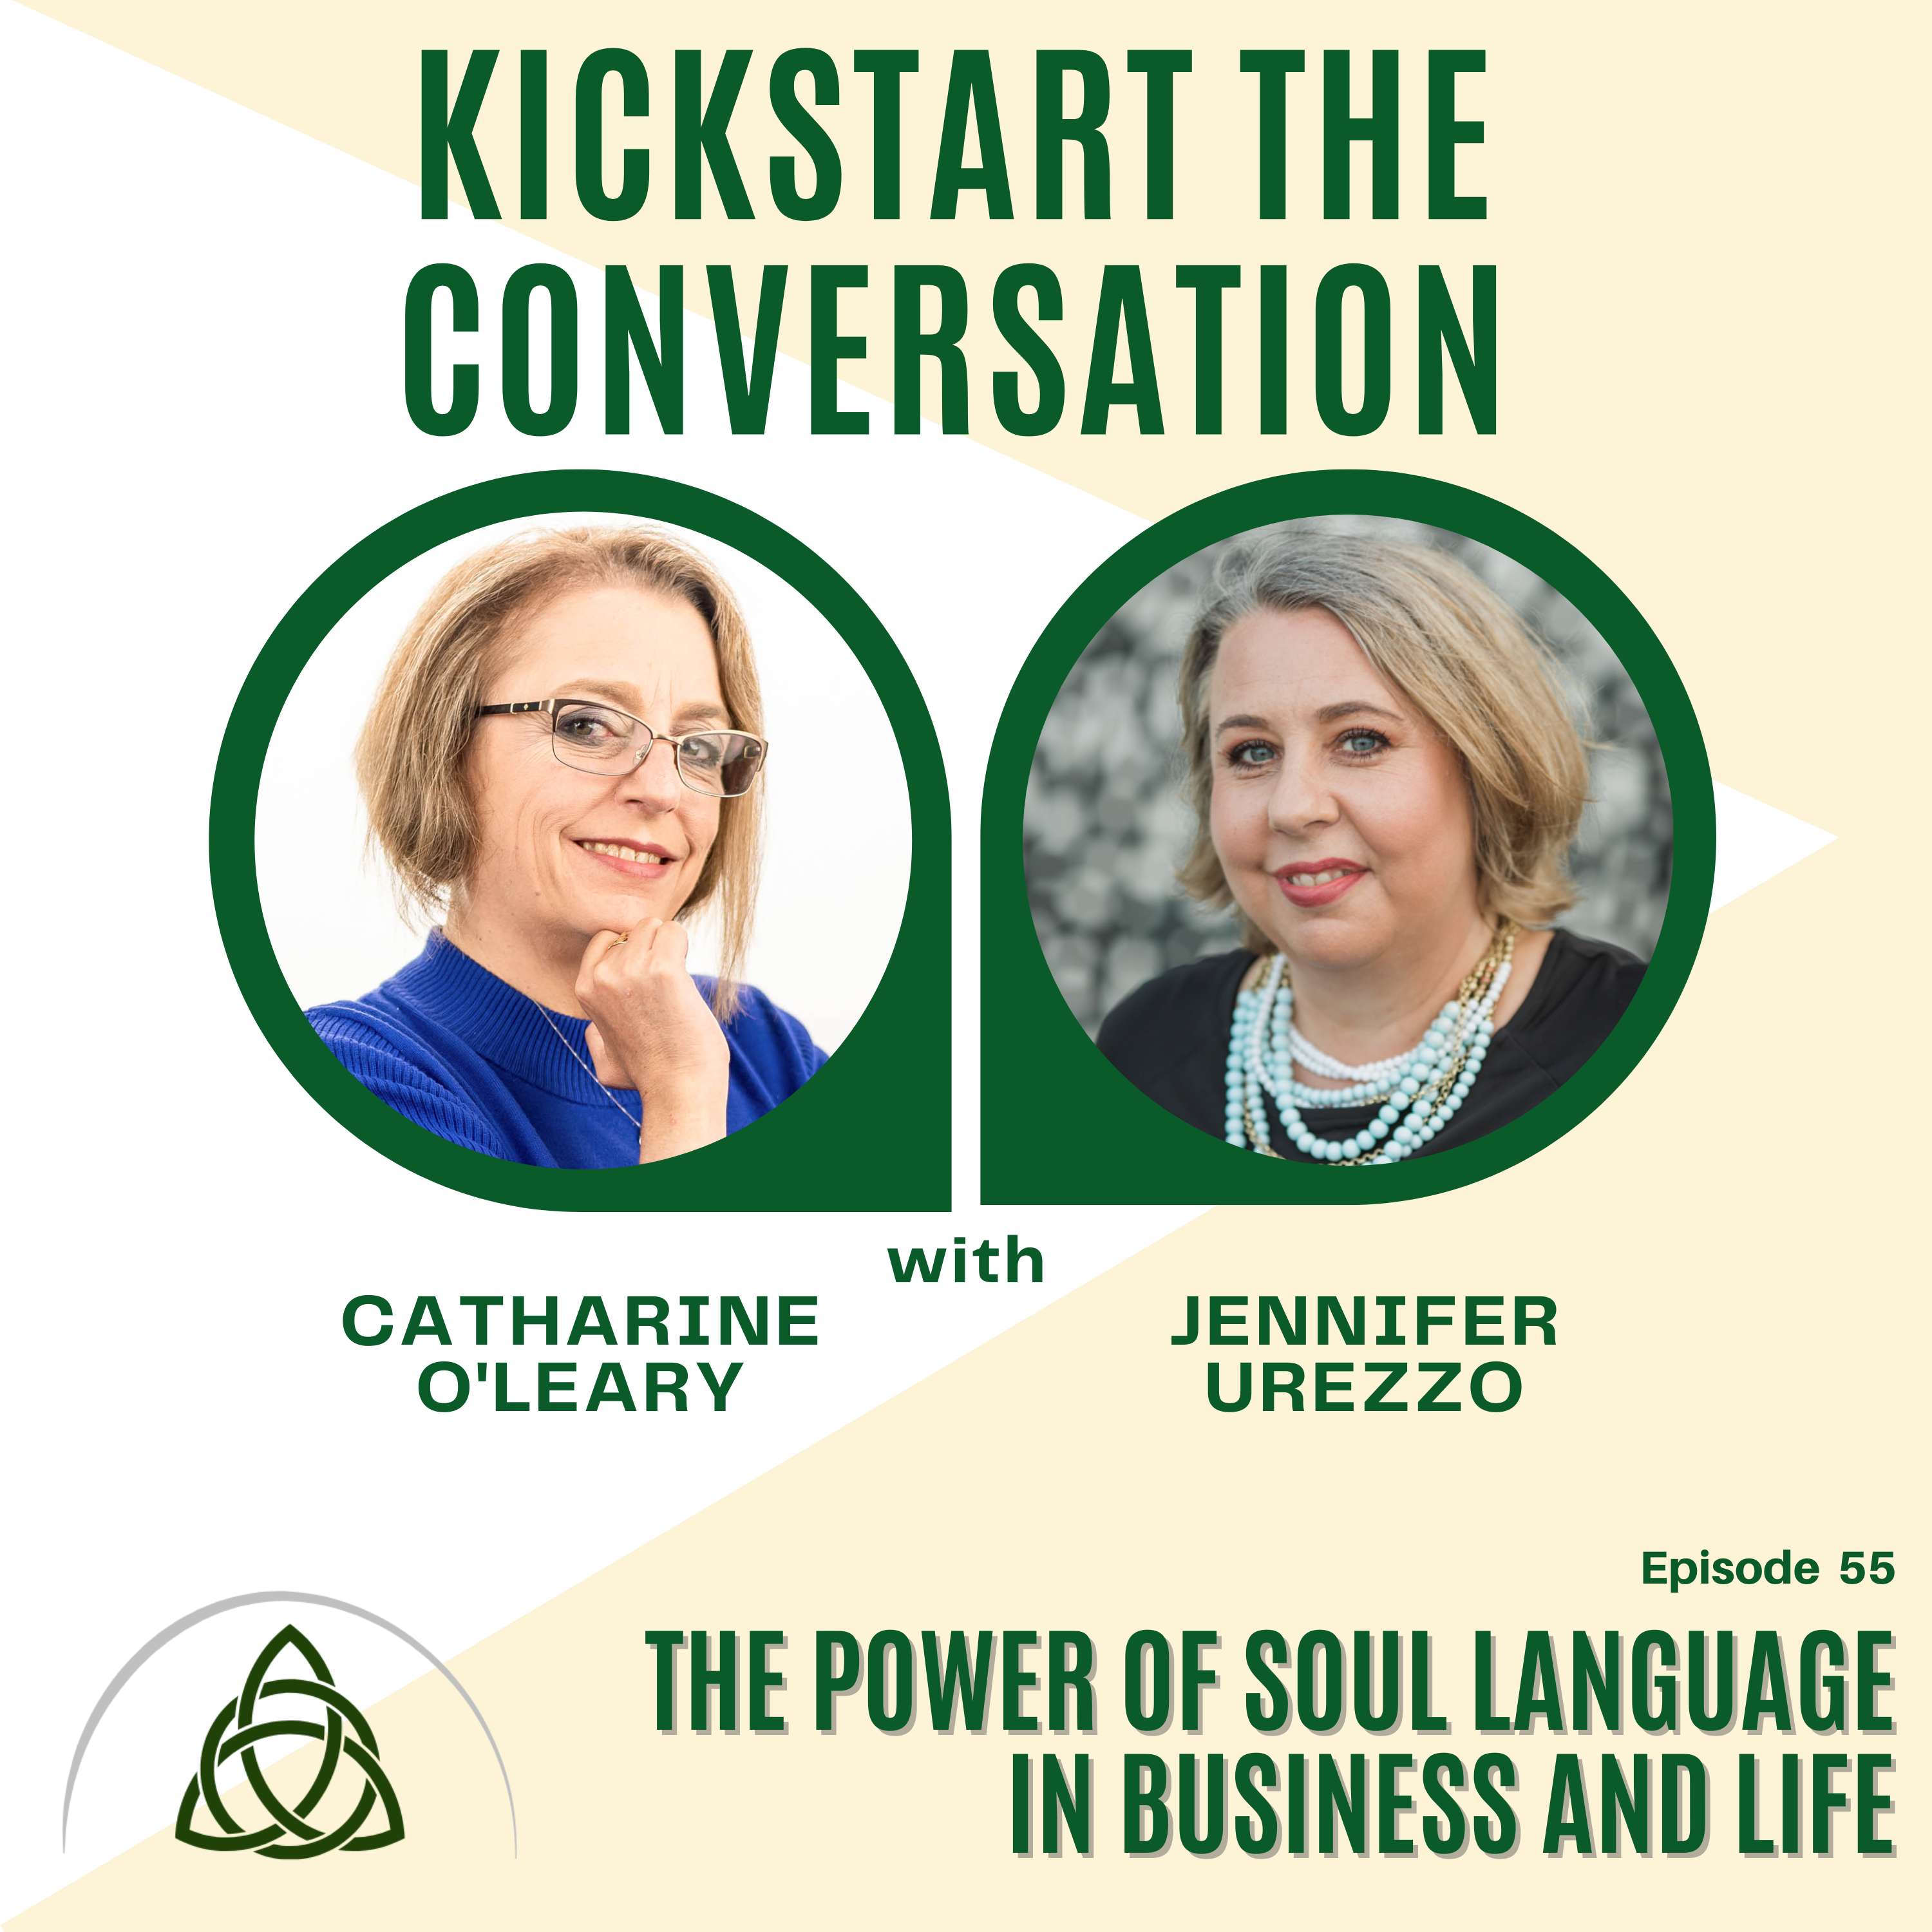 The Power of Soul Language in Business and Life with Jennifer Urezzo